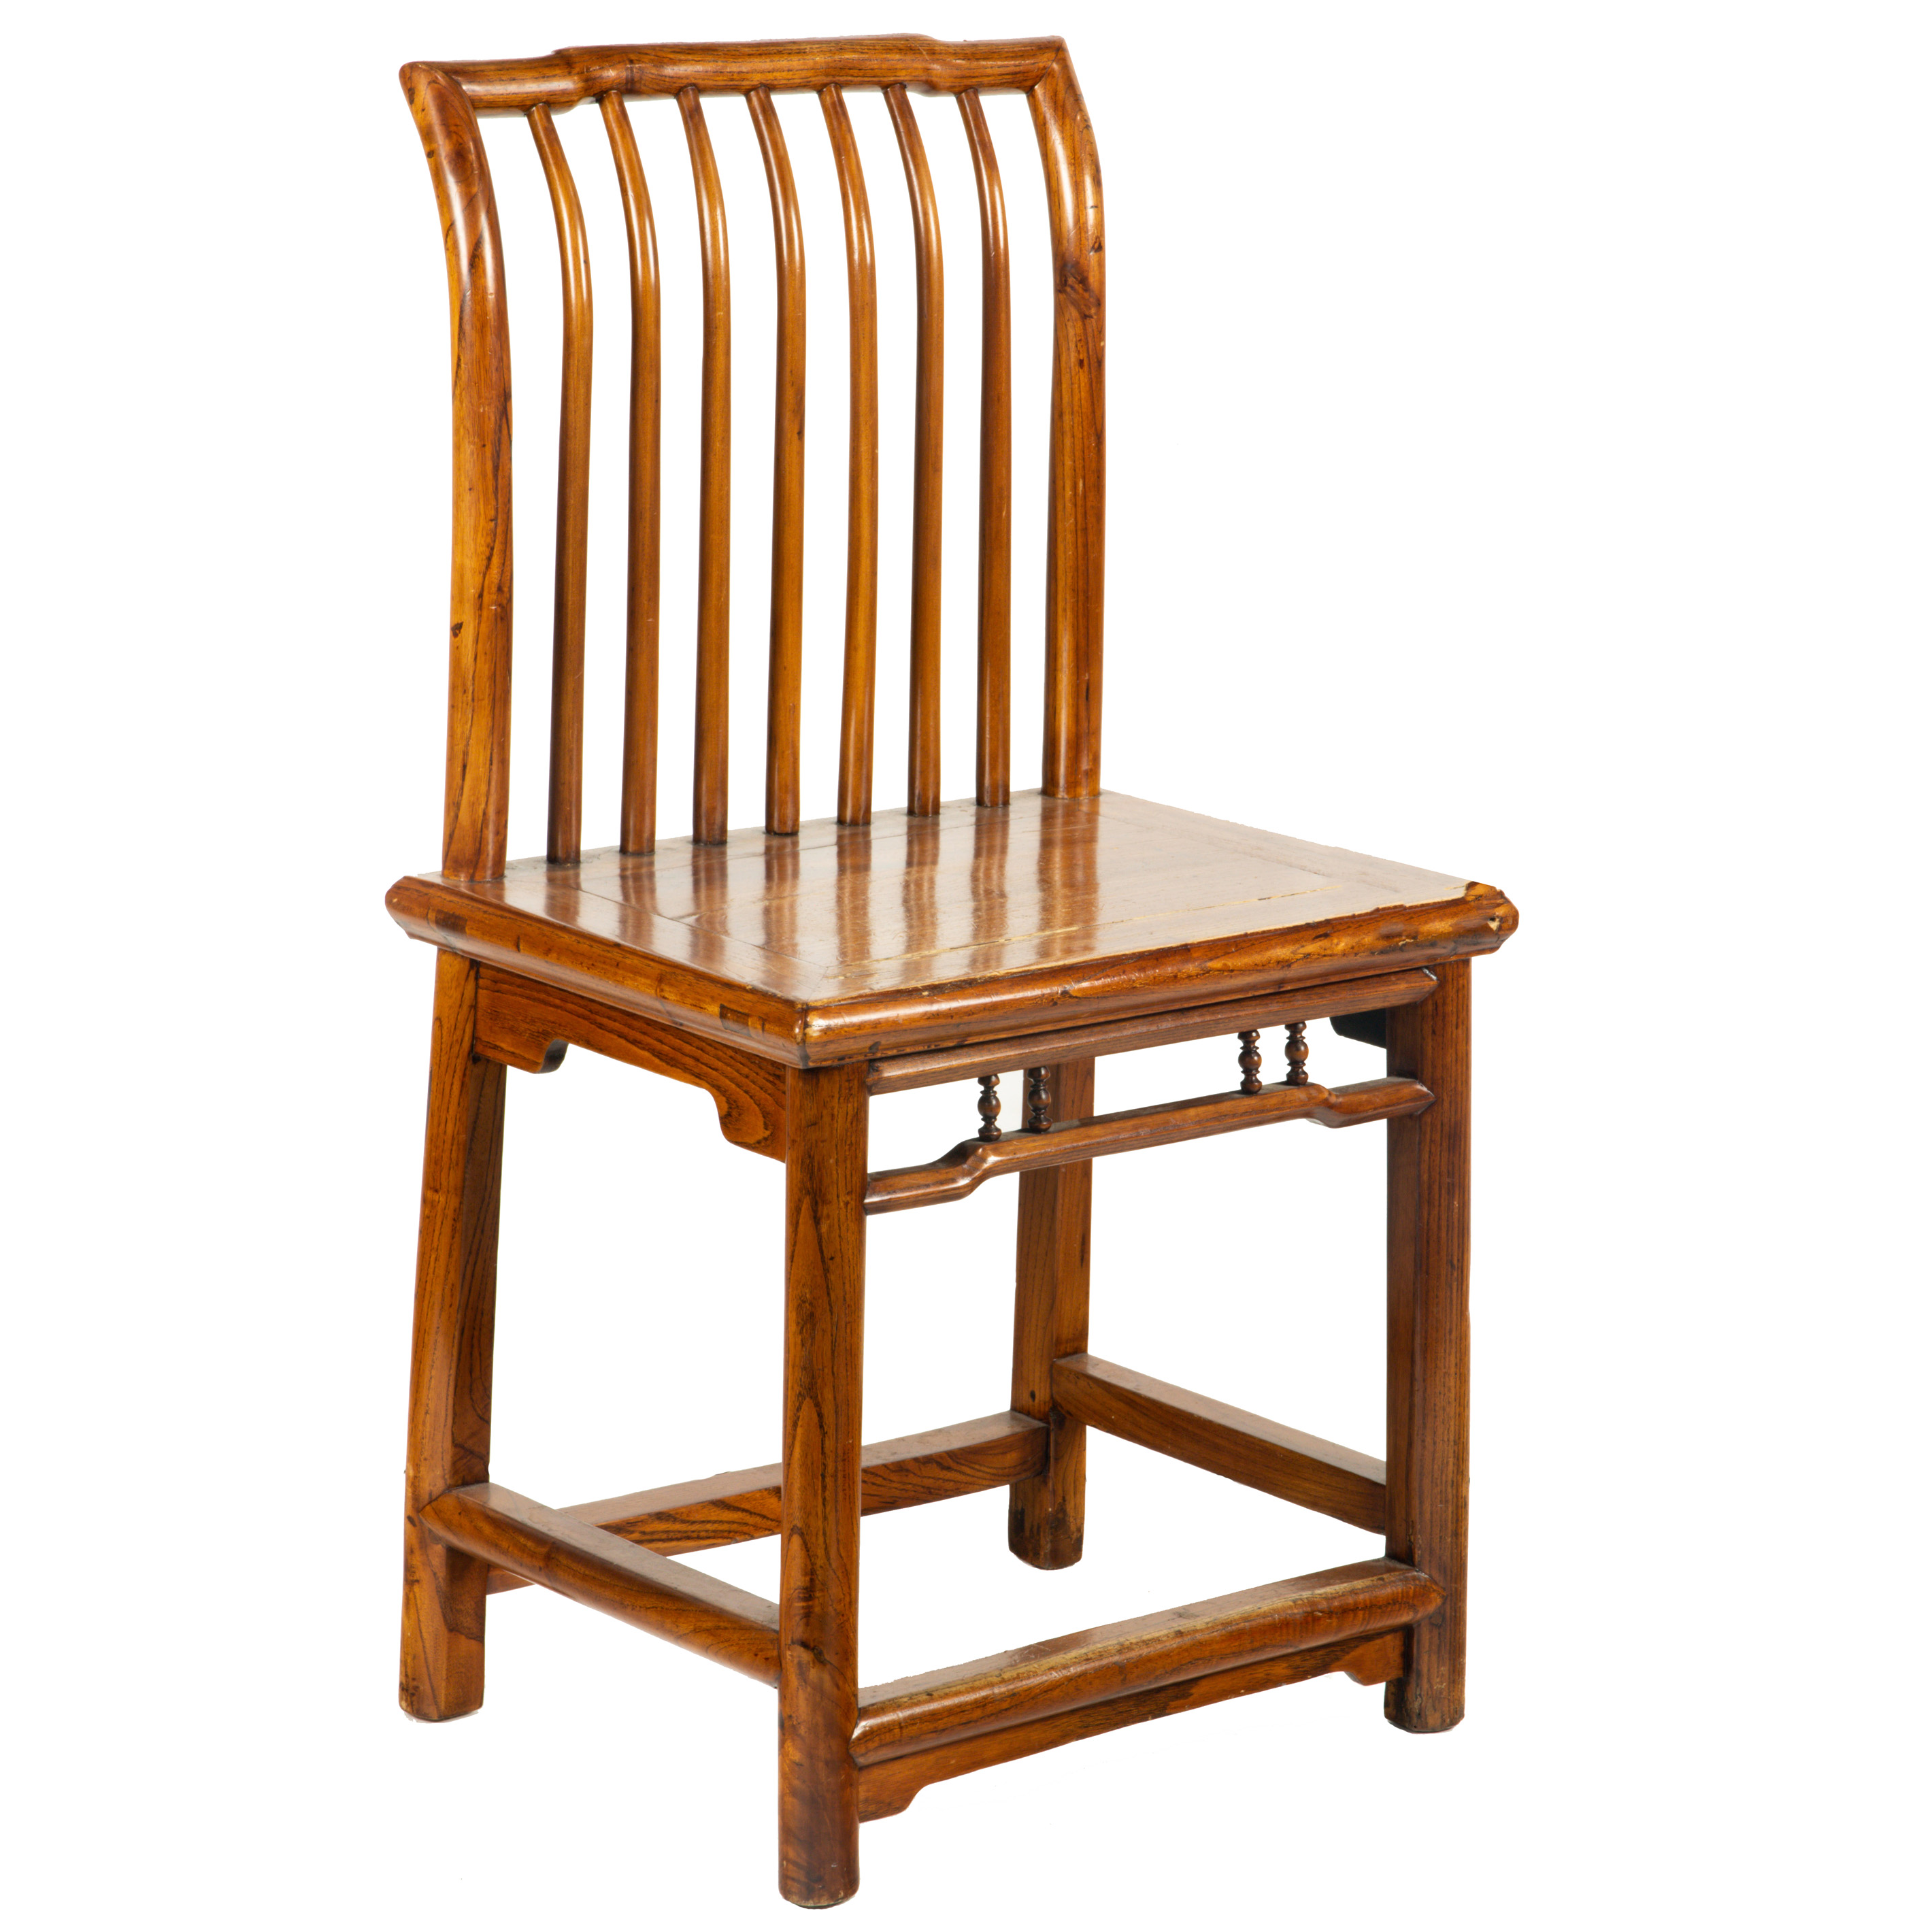 CHINESE ELM SPINDLE BACK SIDE CHAIR 3a37f1